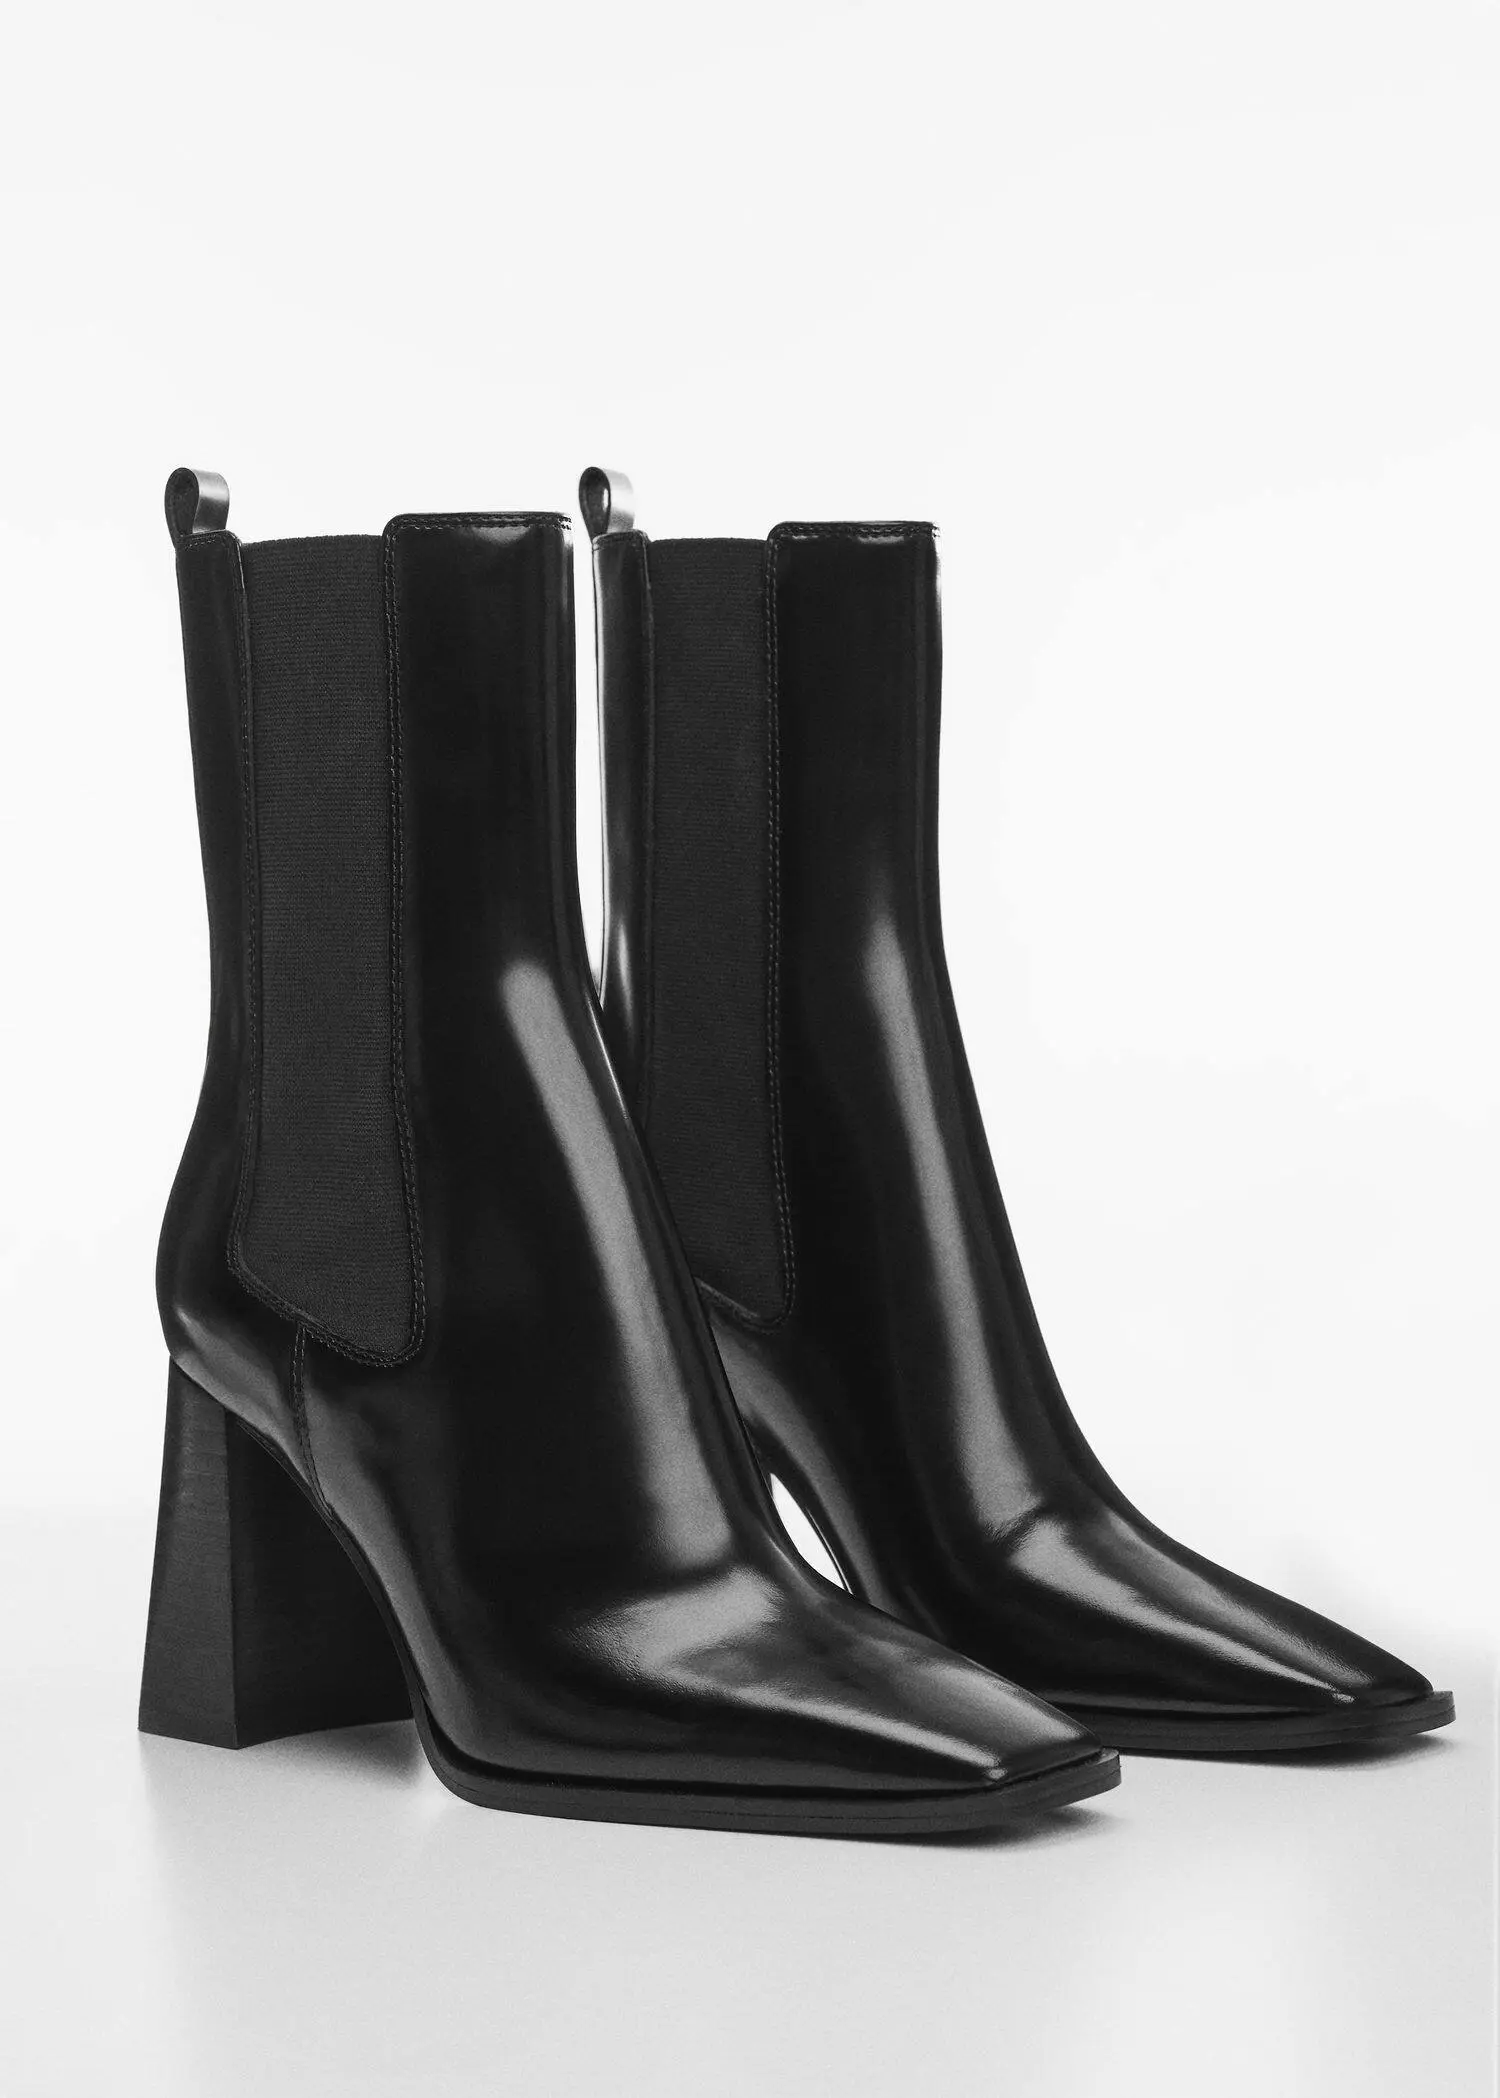 Mango Leather Chelsea ankle boots. 3